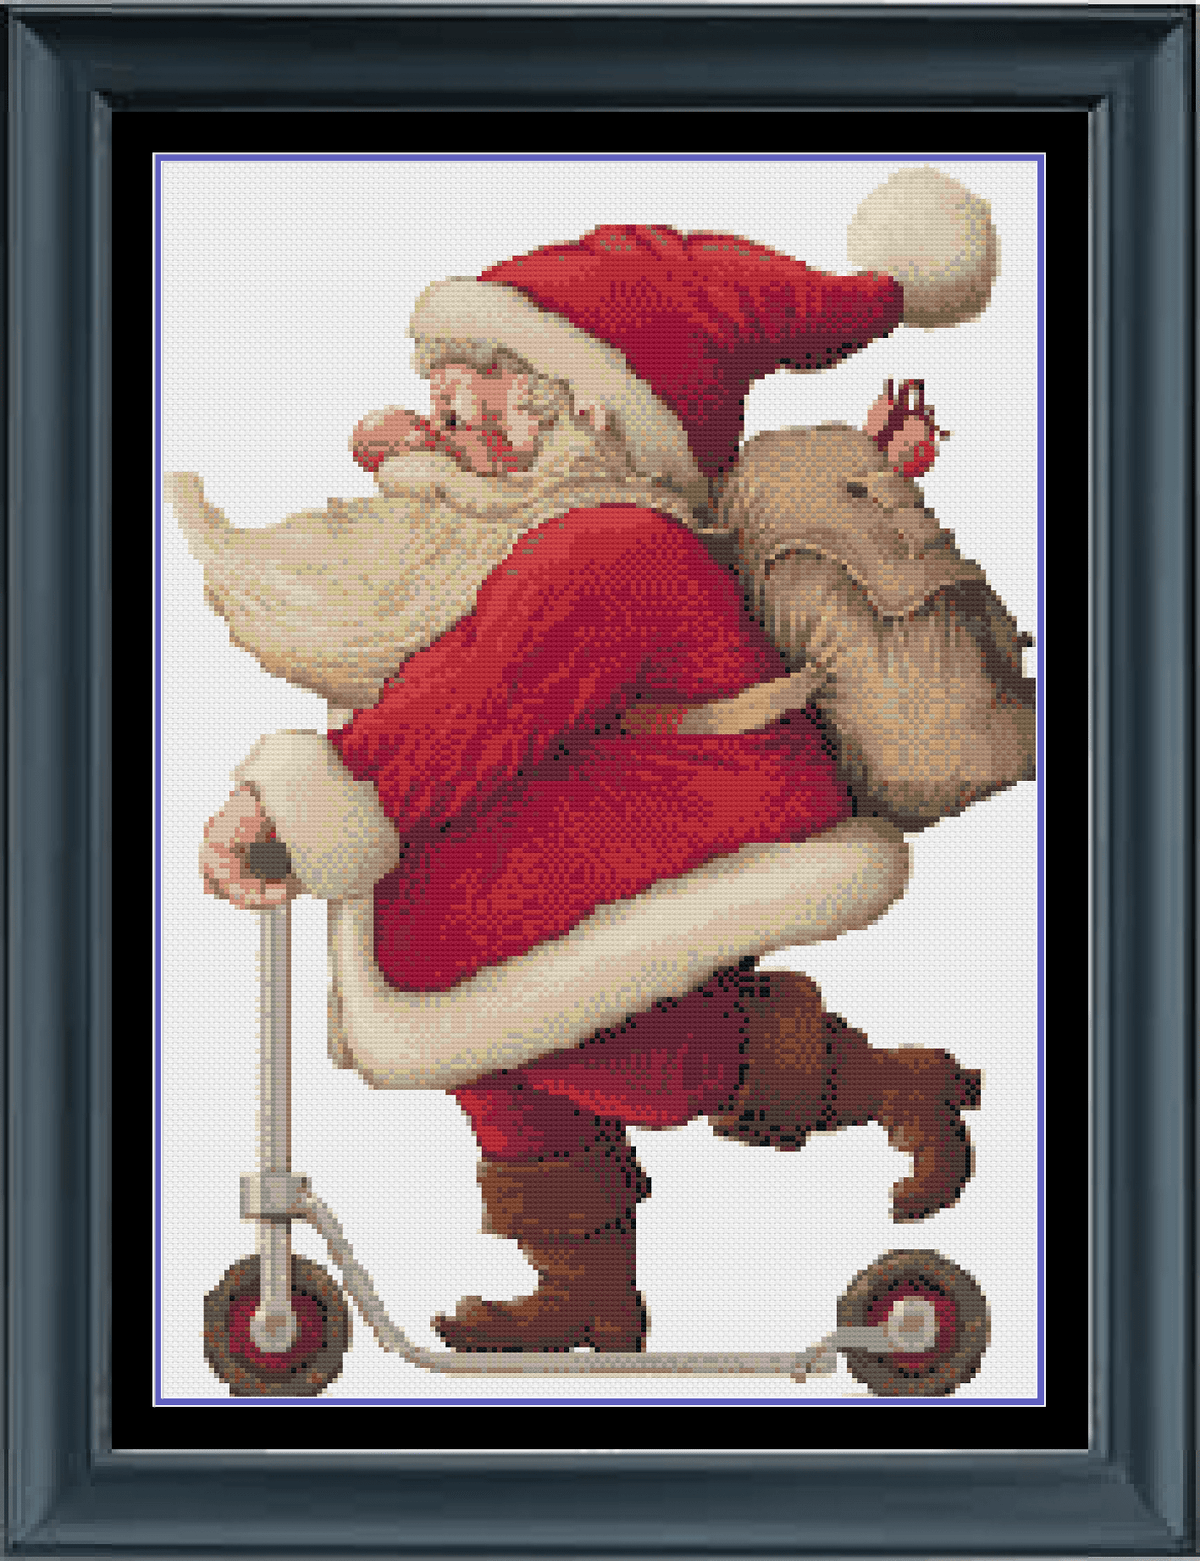 Stitching Jules Design Cross Stitch Pattern Santa Claus On Scooter Christmas Funny Cross Stitch Embroidery Needlepoint Pattern PDF Download - Ready For Pattern Keeper